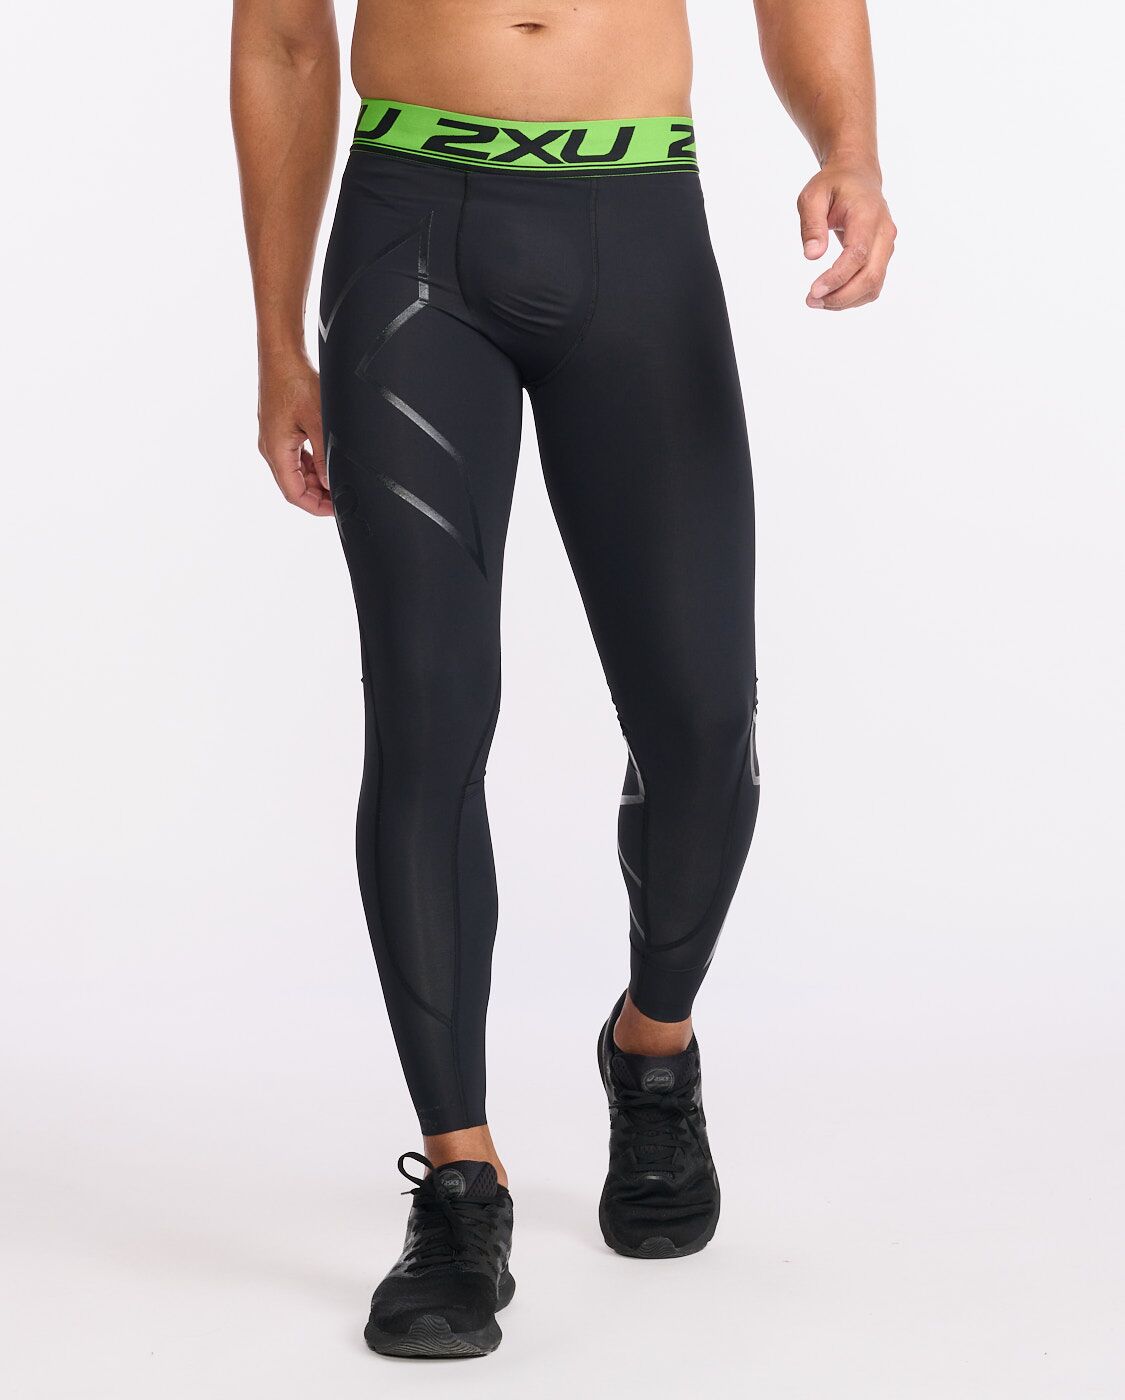 Recovery compression Tights 2XU